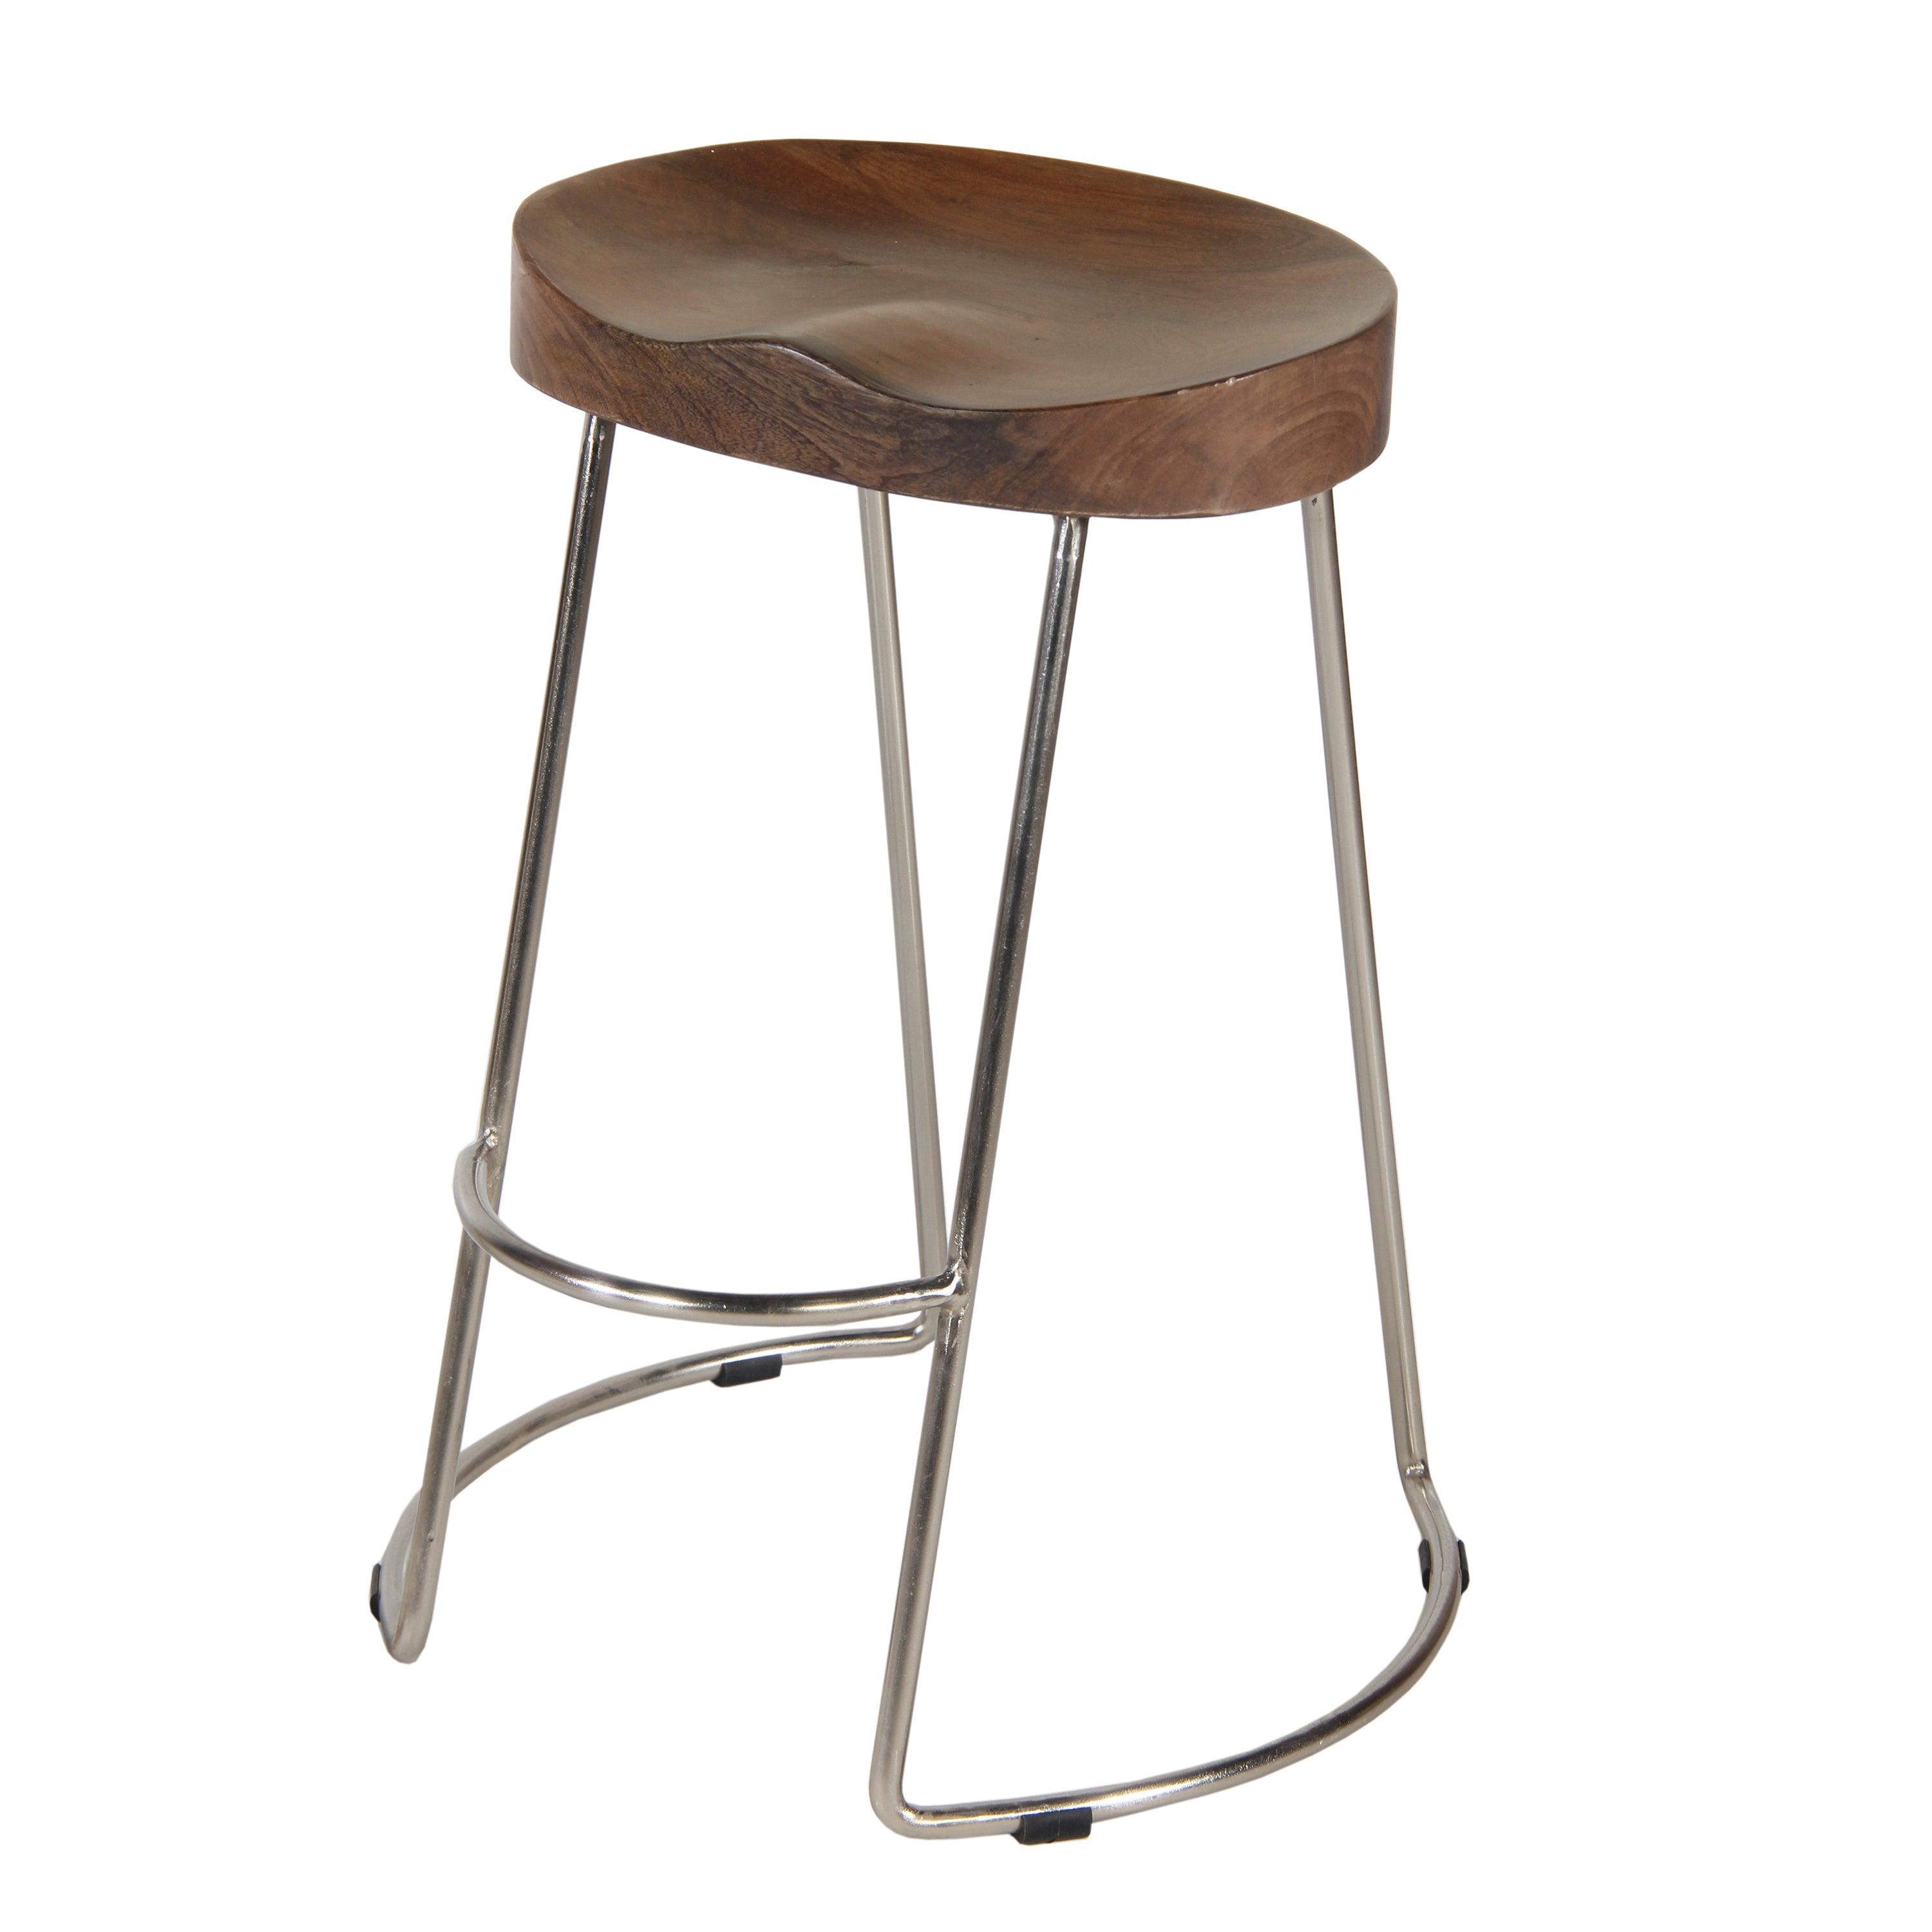 Farmhouse Counter Height Barstool with Wooden Saddle Seat - Brown and Silver